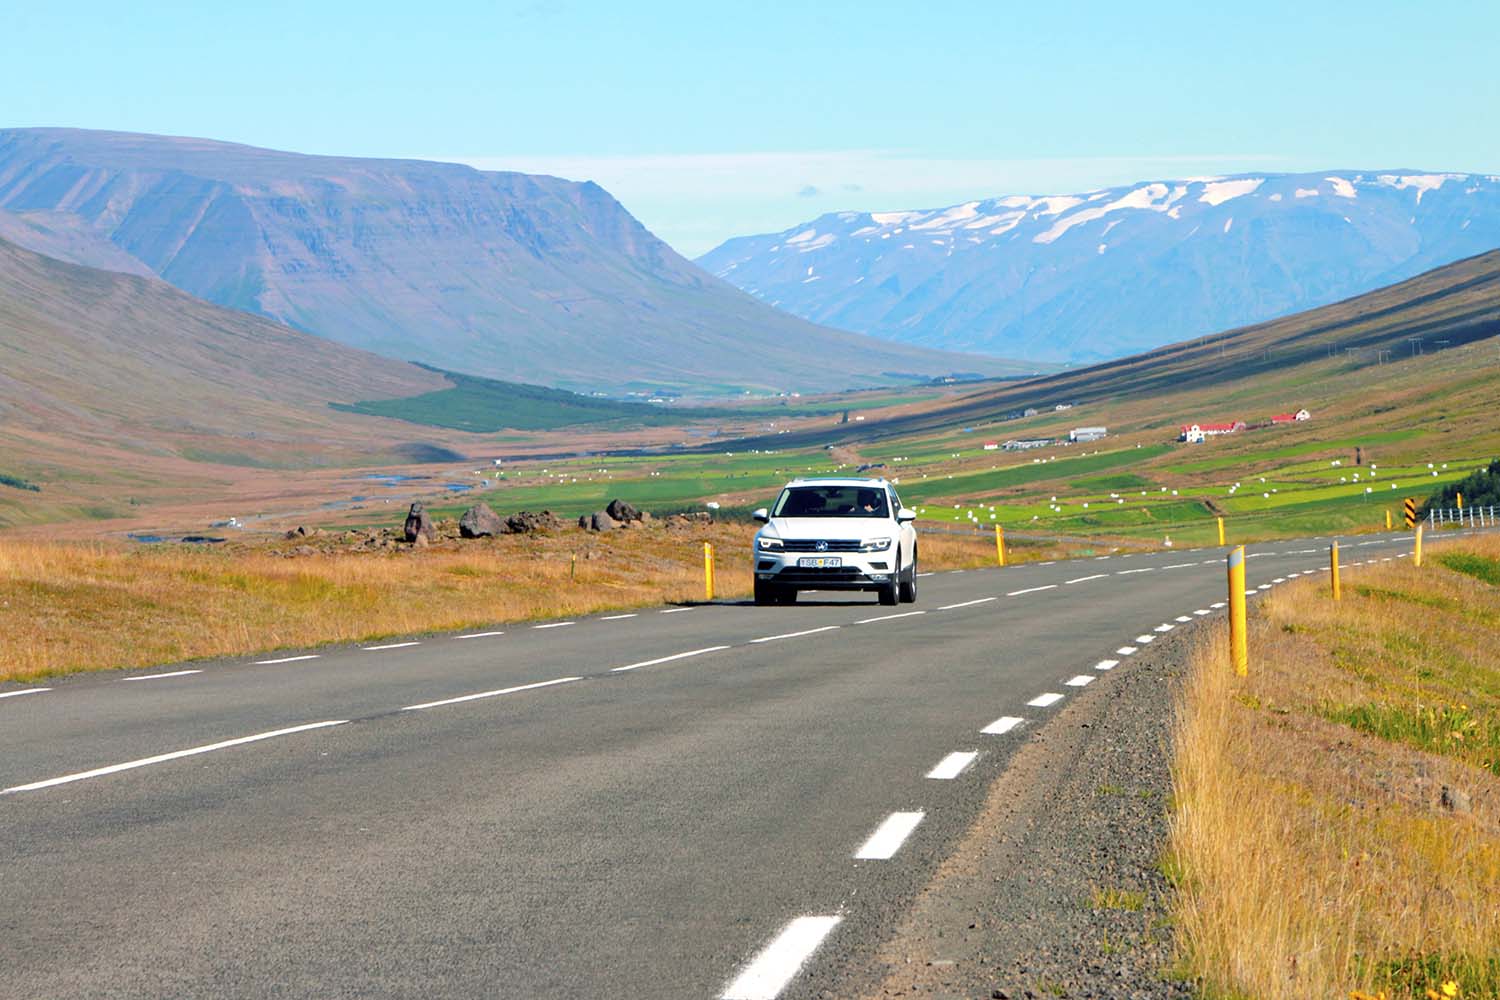 Volkswagen SUV from Holdur Car Rental driving on route 1 in Iceland